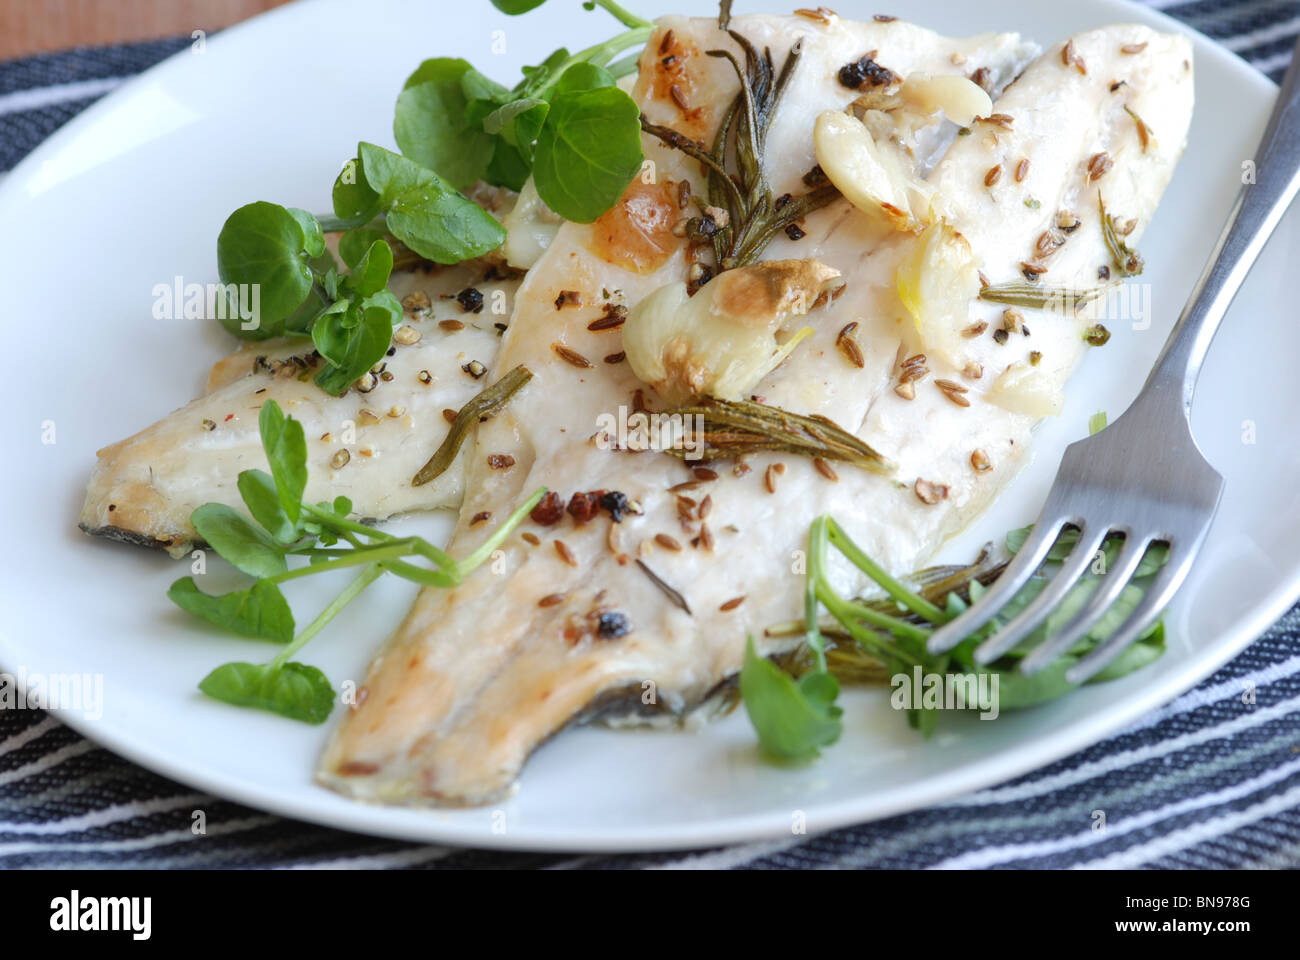 Sea bass fillets with watercress Stock Photo